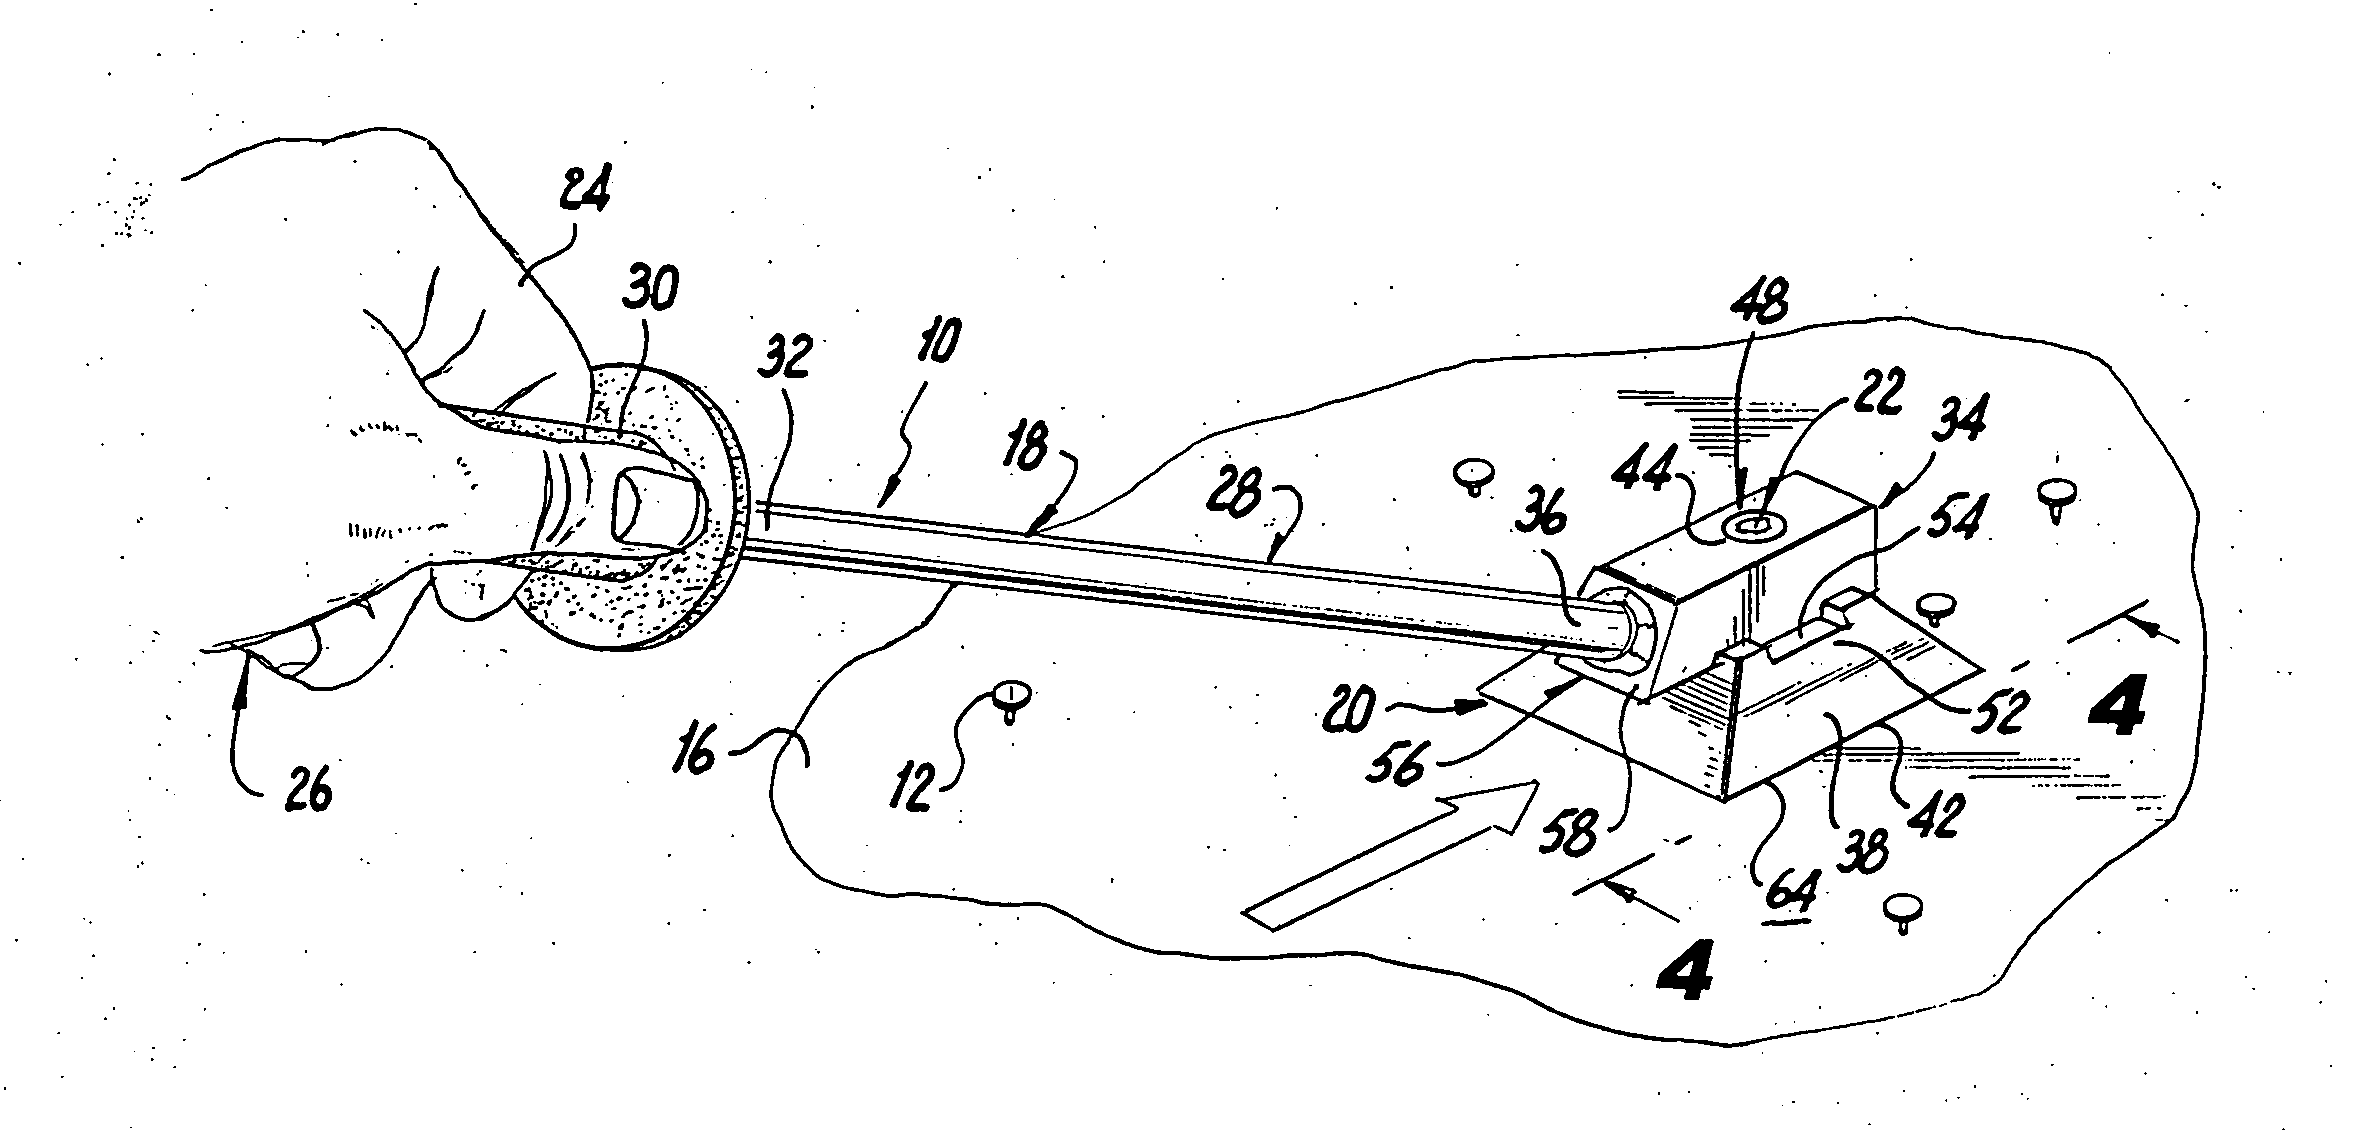 Scraper having weighted cutting head for removing nail heads and other debris from surfaces